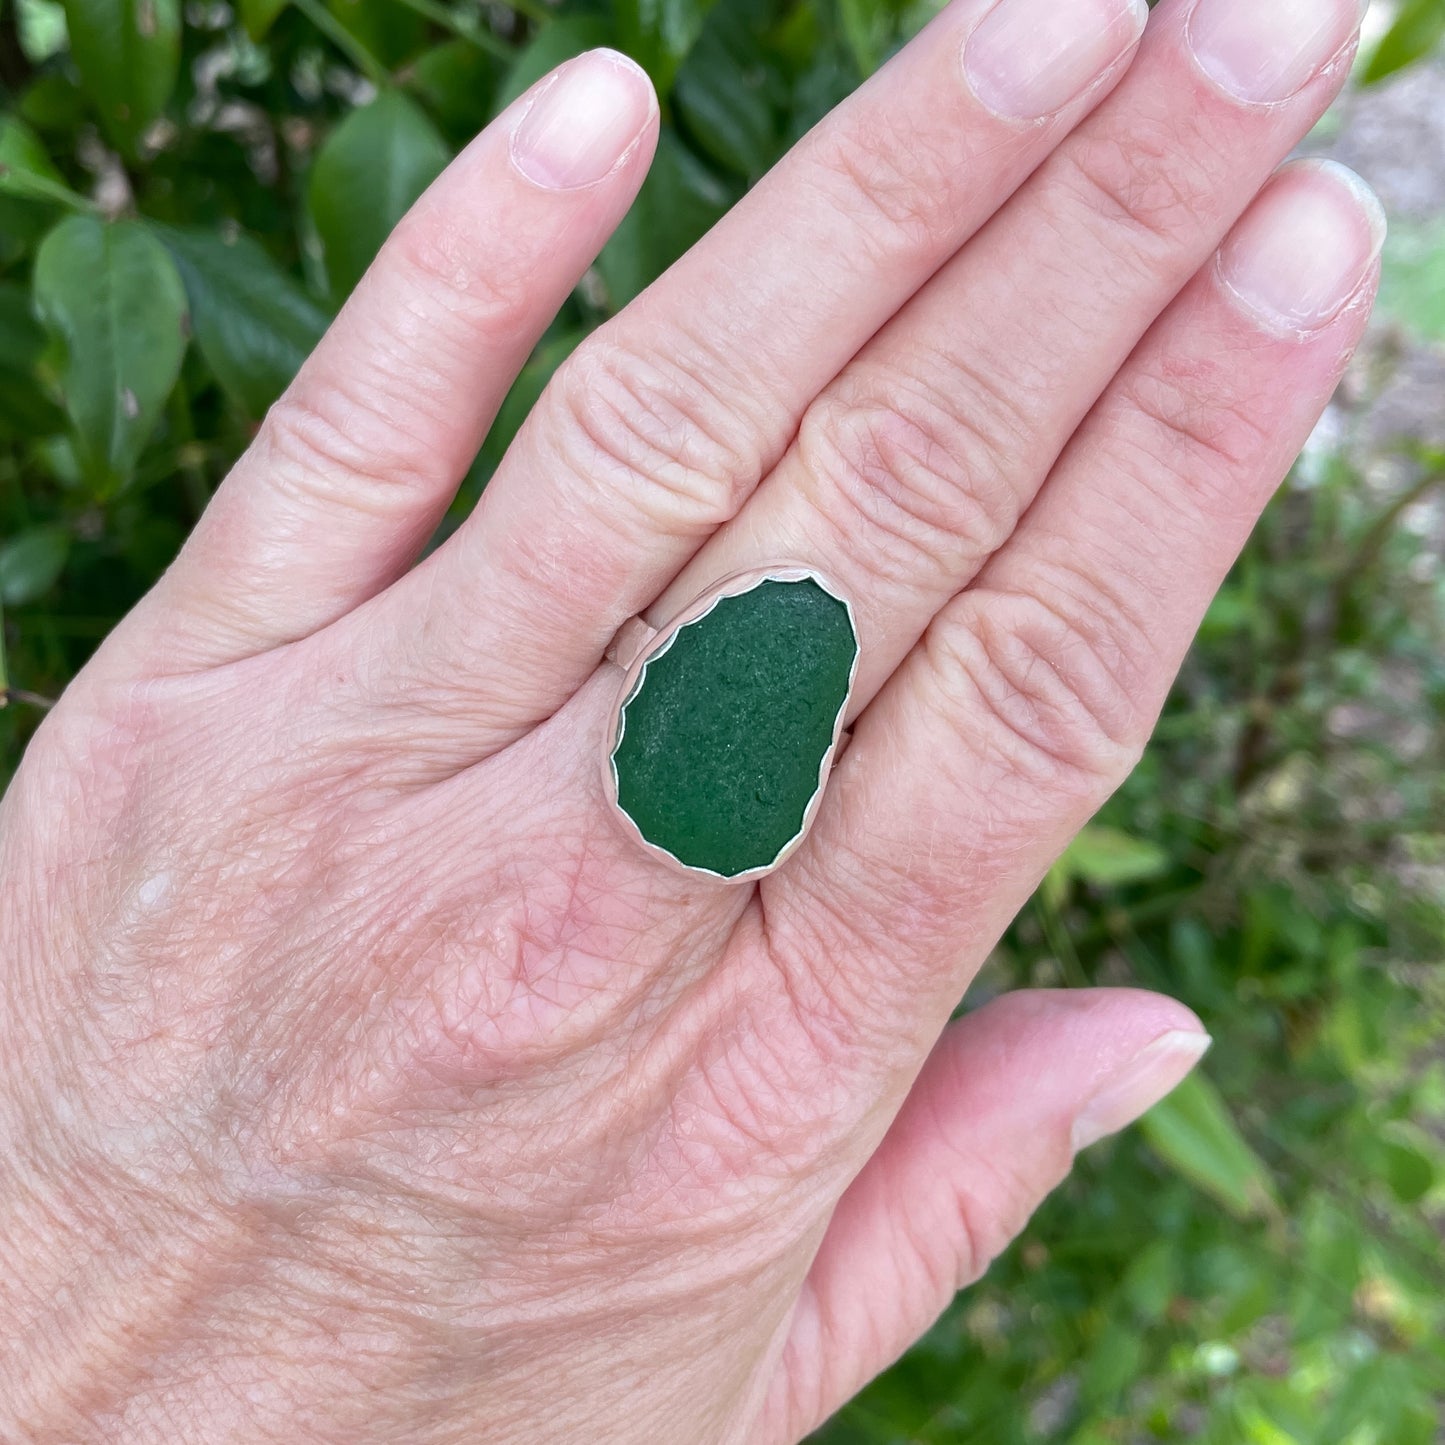 This is a large chunky piece of European dark emerald green sea glass that is set in a fine & sterling silver scalloped bezel setting and on a sturdy silver band.  Size 10 1/2 modeled on a hand.